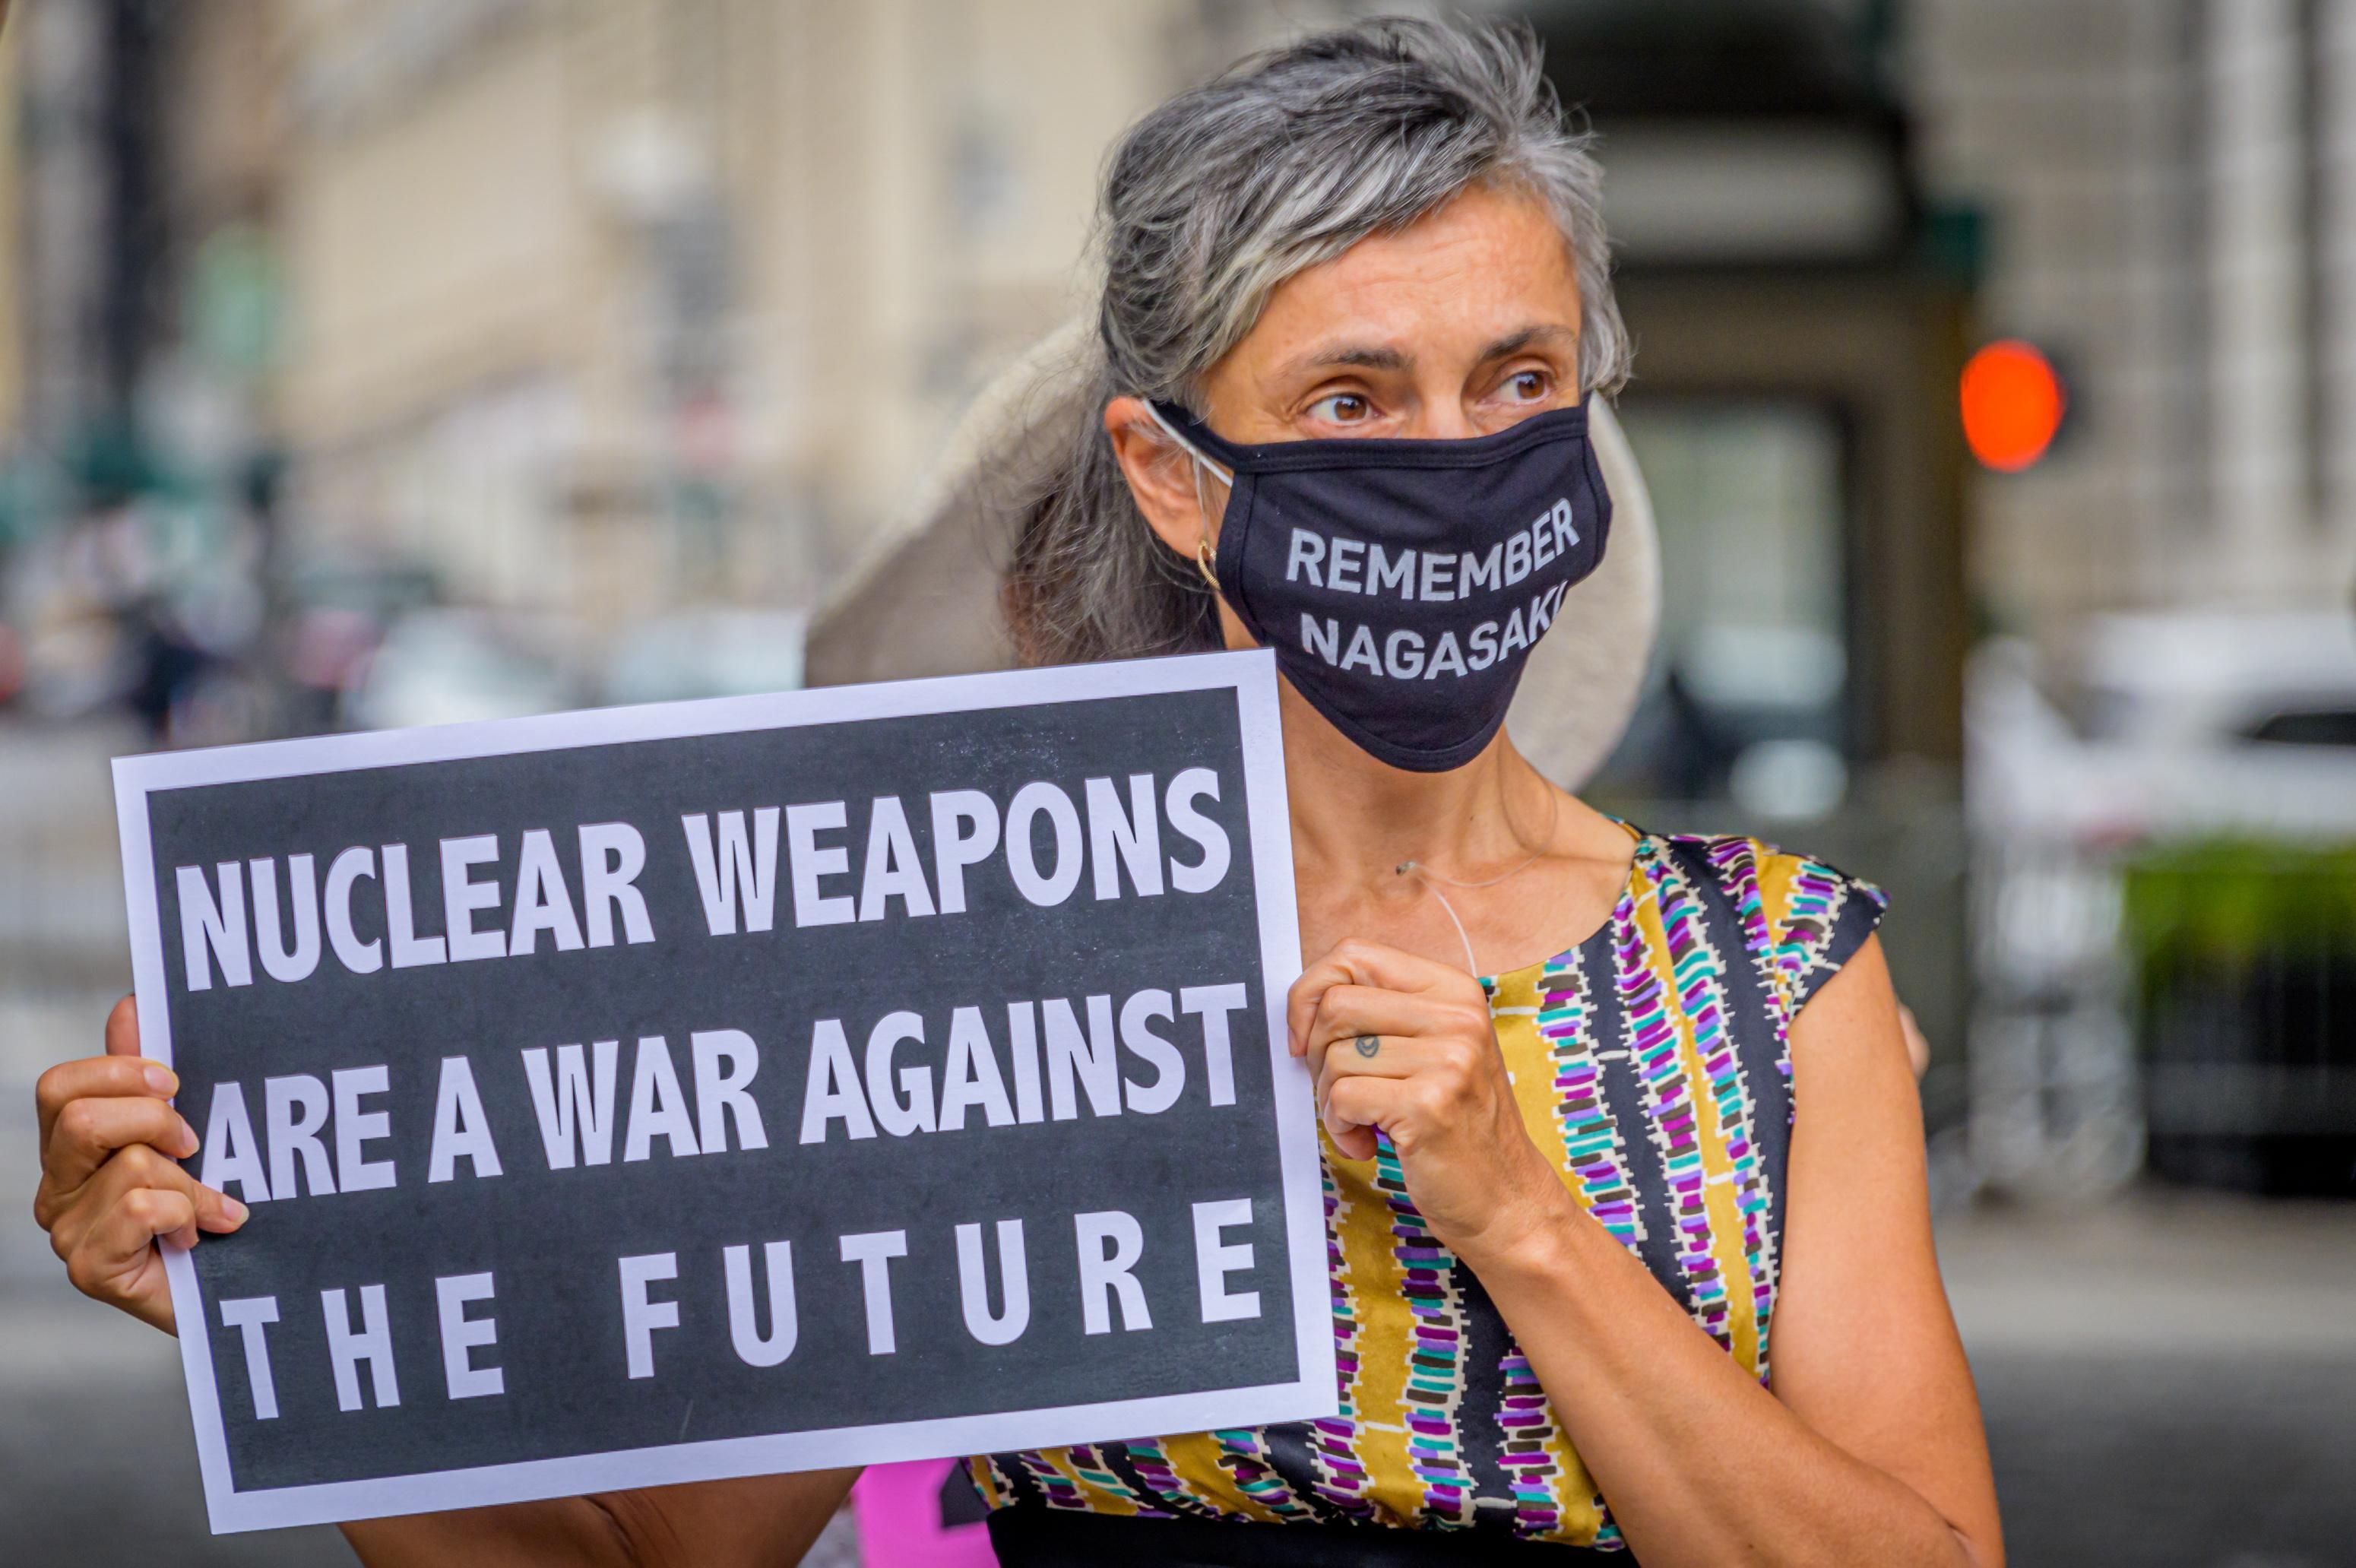 Members of the New York Campaign to Abolish Nuclear weapons gathered in Manhattan on August 6, 2020, the 75th anniversary of the atomic bombing of the city of Hiroshima. (Photo: Erik McGregor/LightRocket via Getty Images)